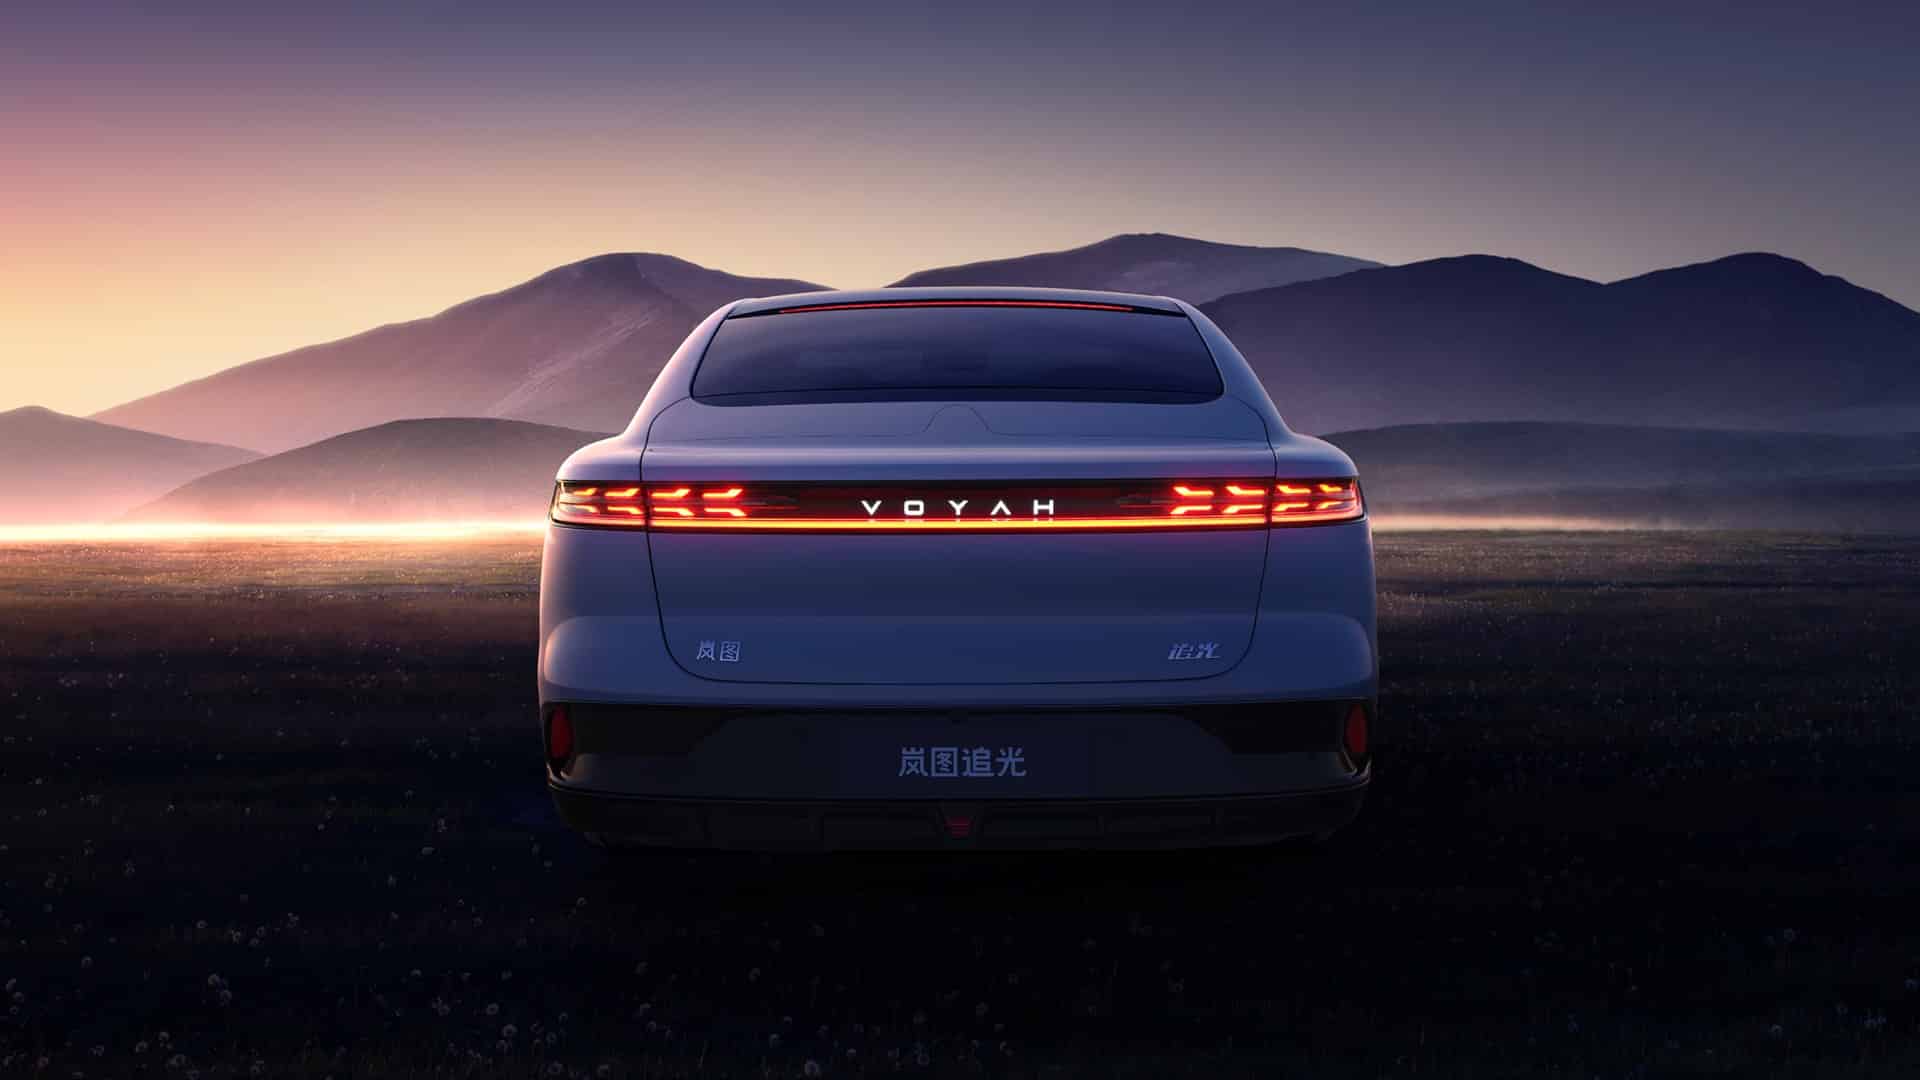 Voyah Zhuiguang electric sedan debuts in China with 510 hp and 730 km range